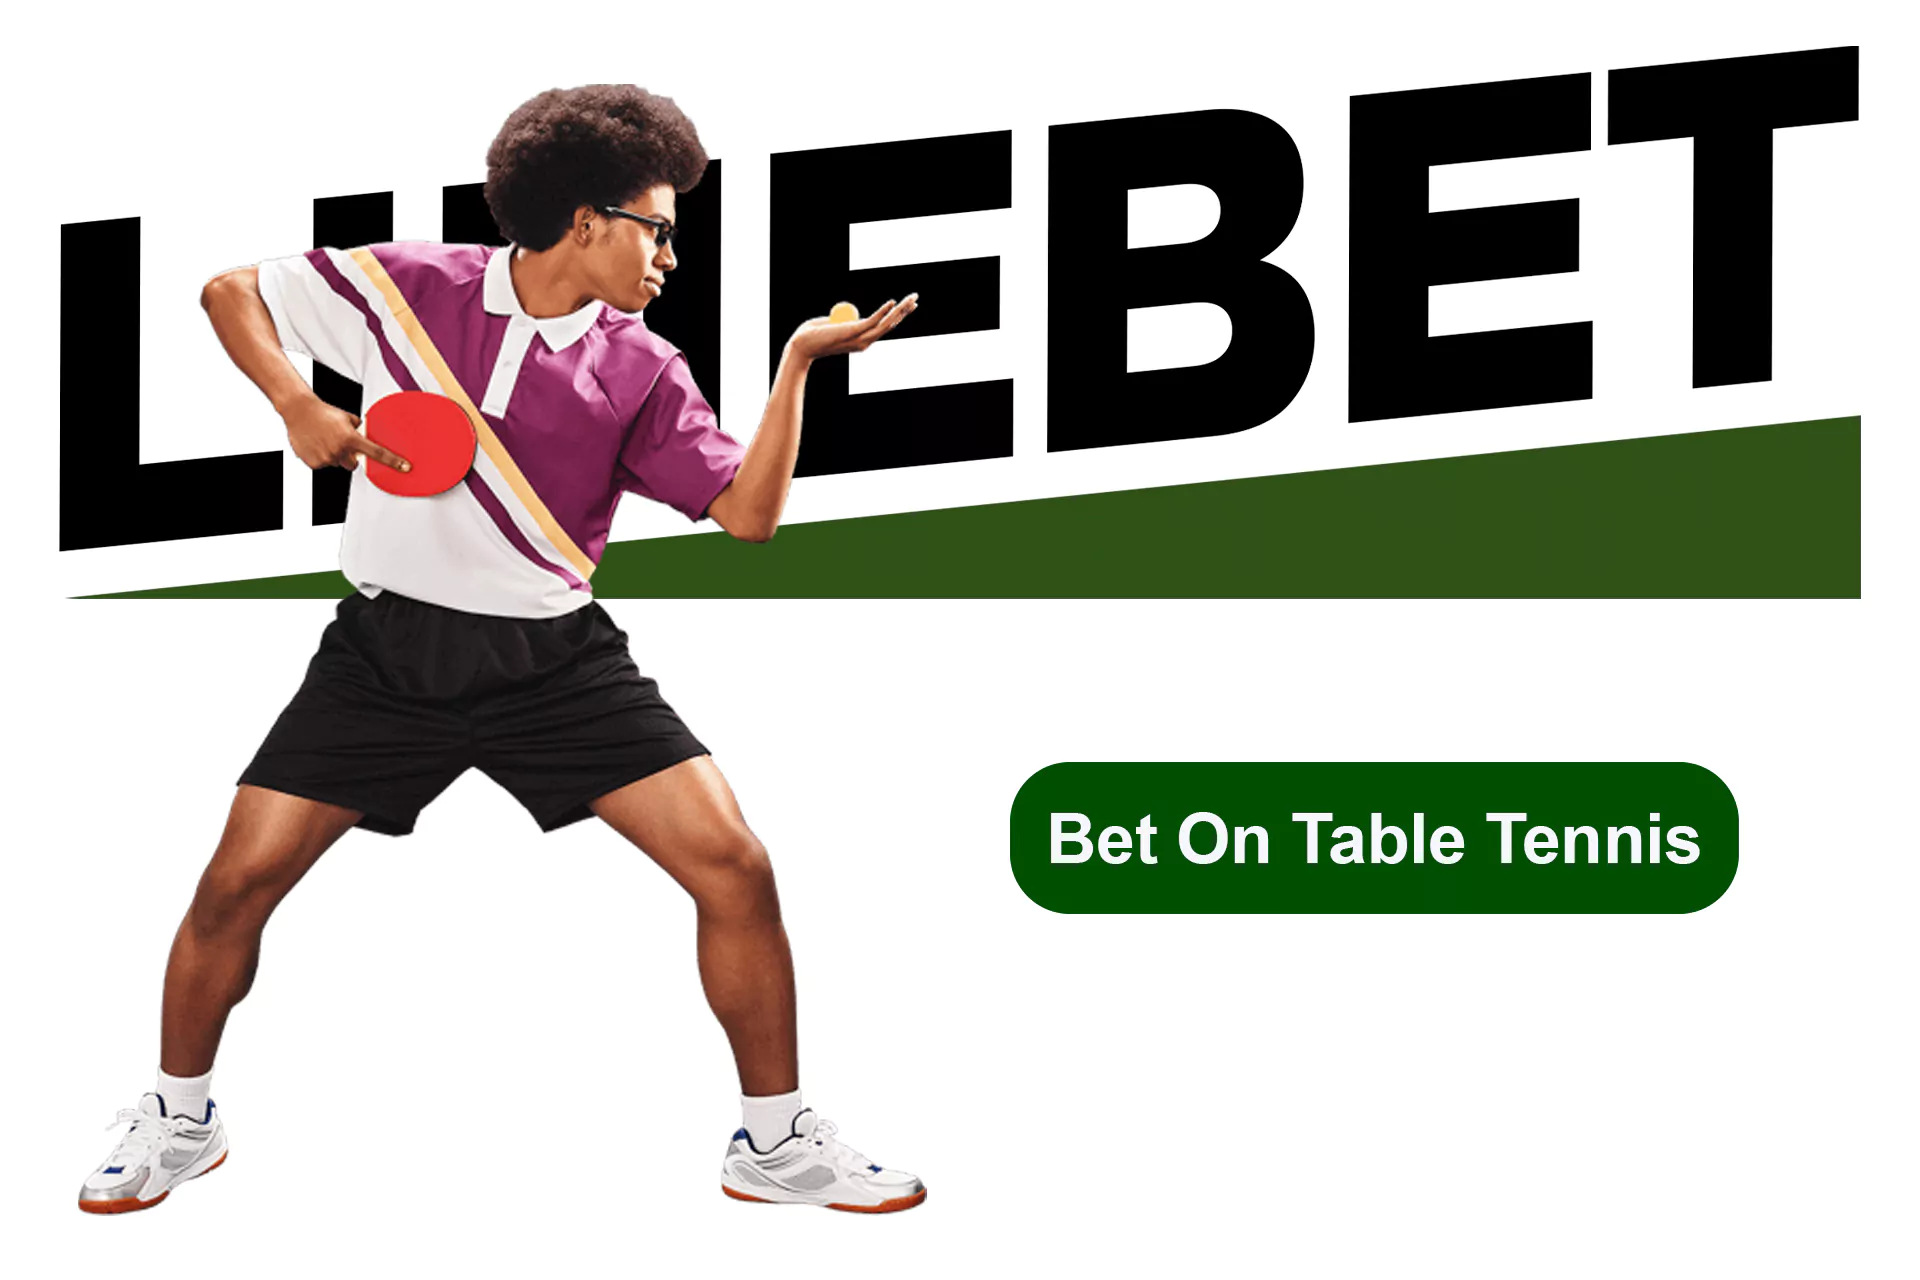 On Linebet you can bet on table tennis matches.